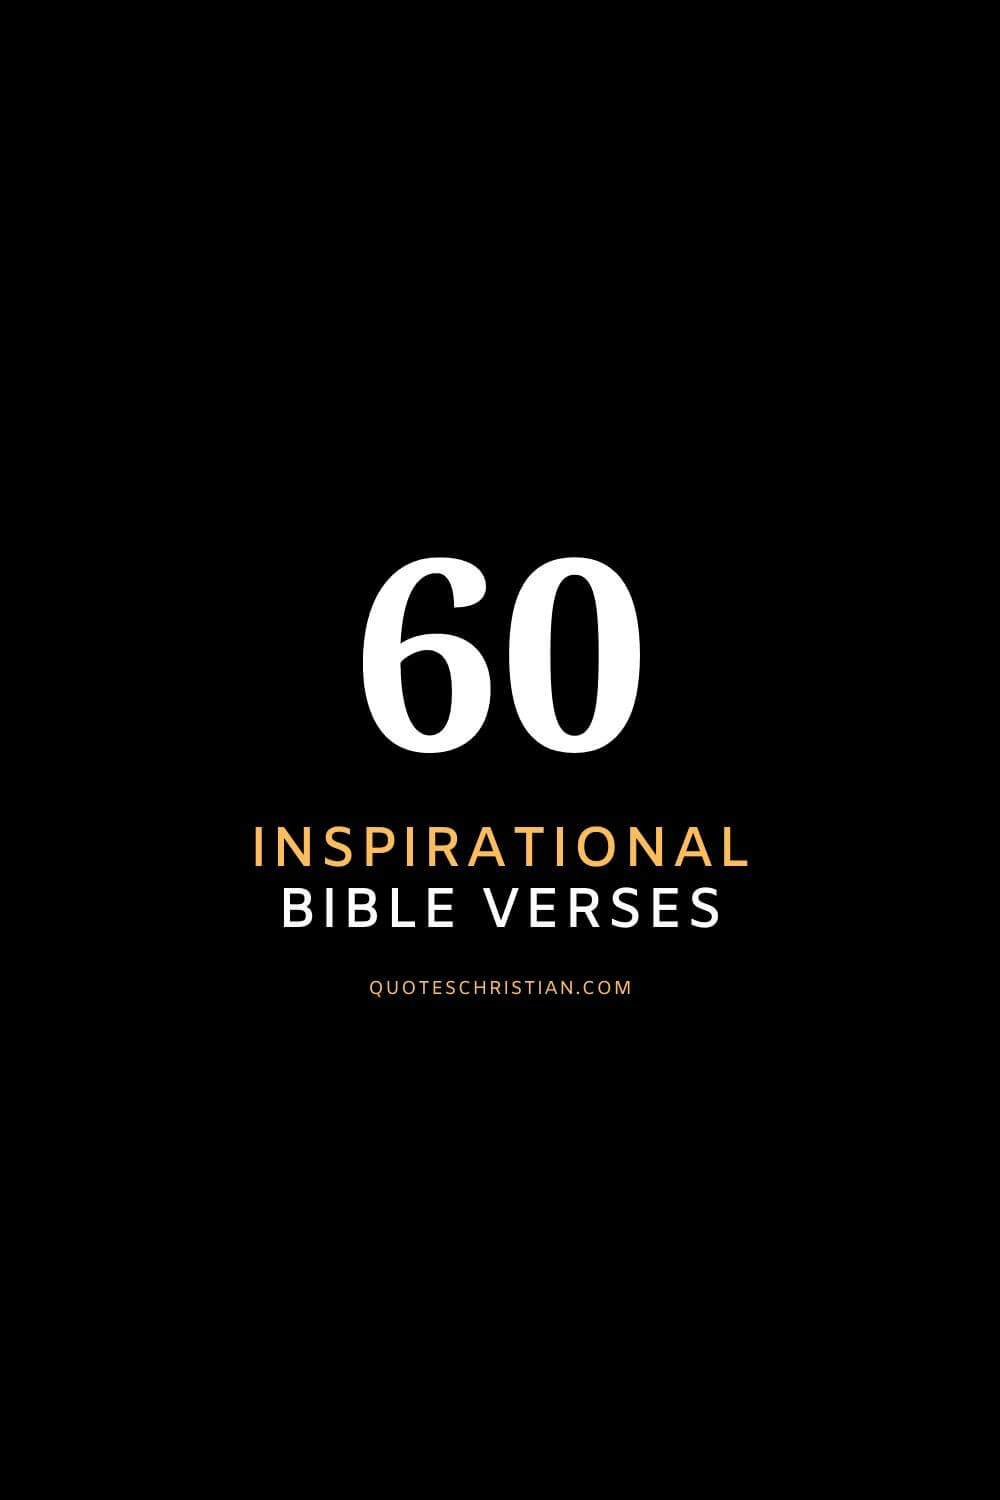 Find inspirational verses from the Bible to give you hope and encourage you. Scroll to the bottom of the page for verses sorted by topic.